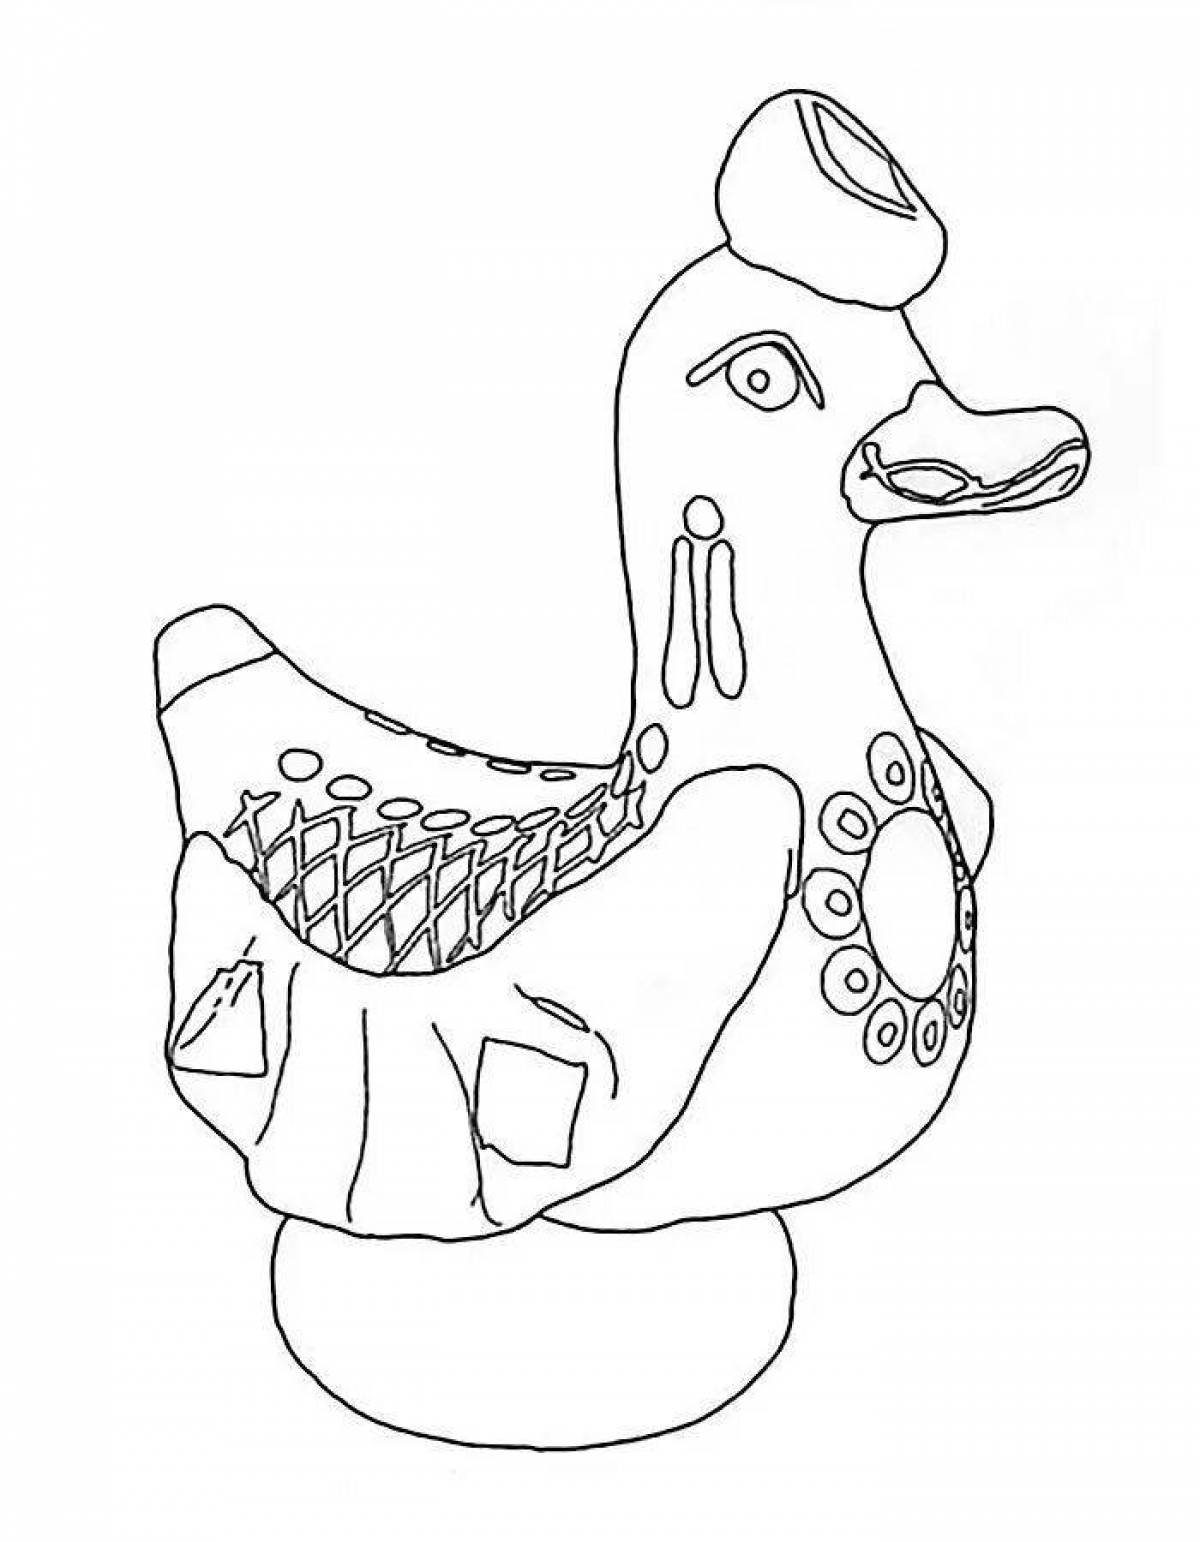 Cool Dymkovo duck coloring page